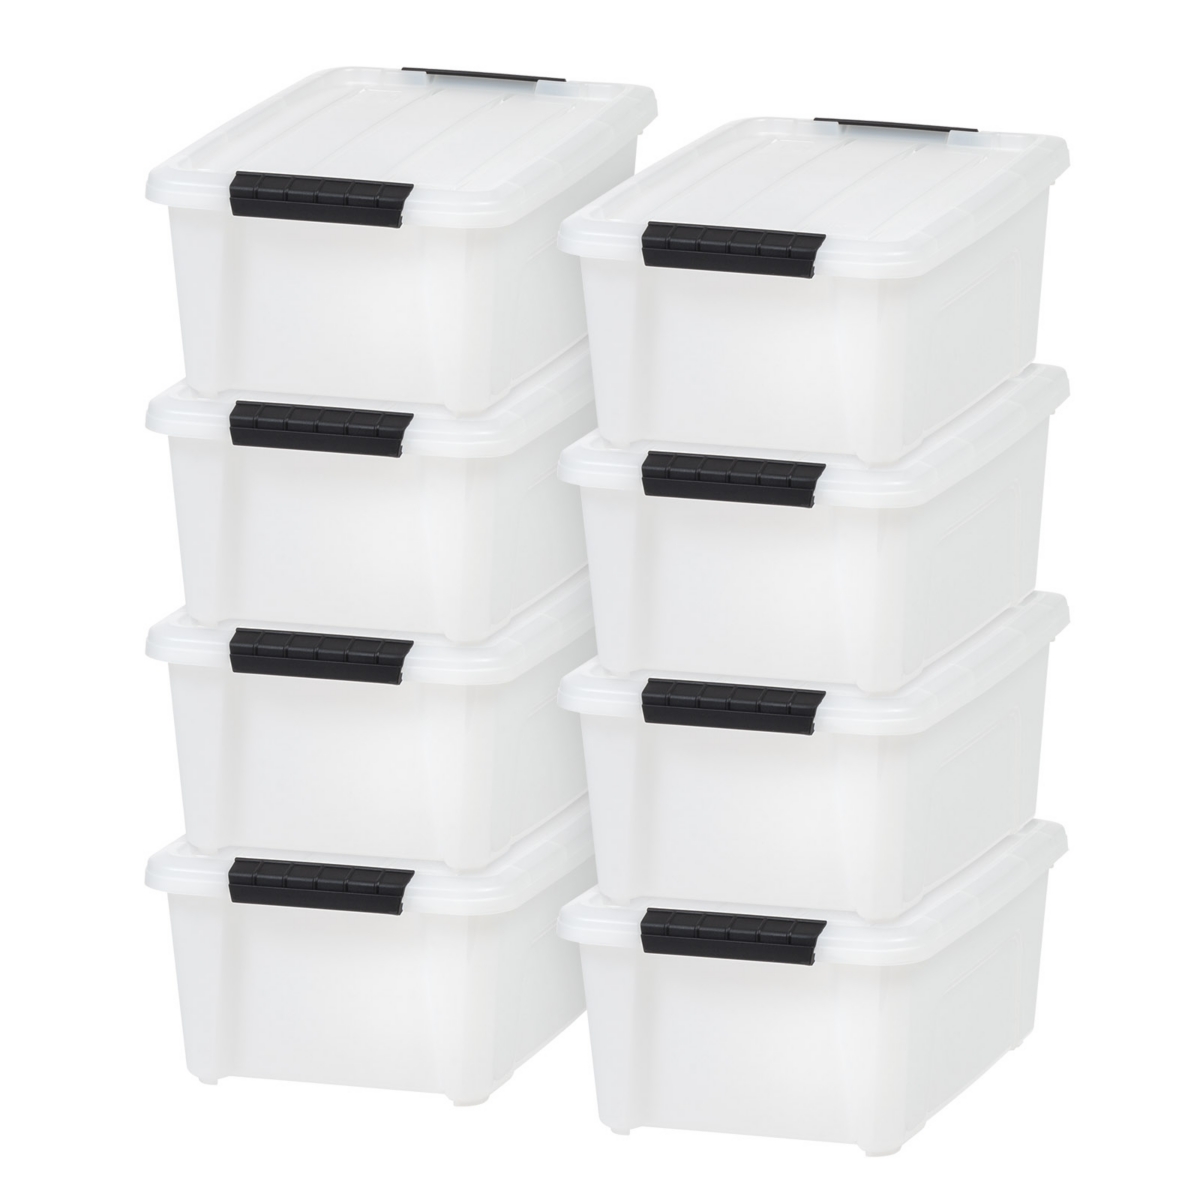 8 Pack 13.5 Quart Stackable Plastic Storage Bins with Lids and Latching Buckles, Pearl, Containers with Lids and Latches - White